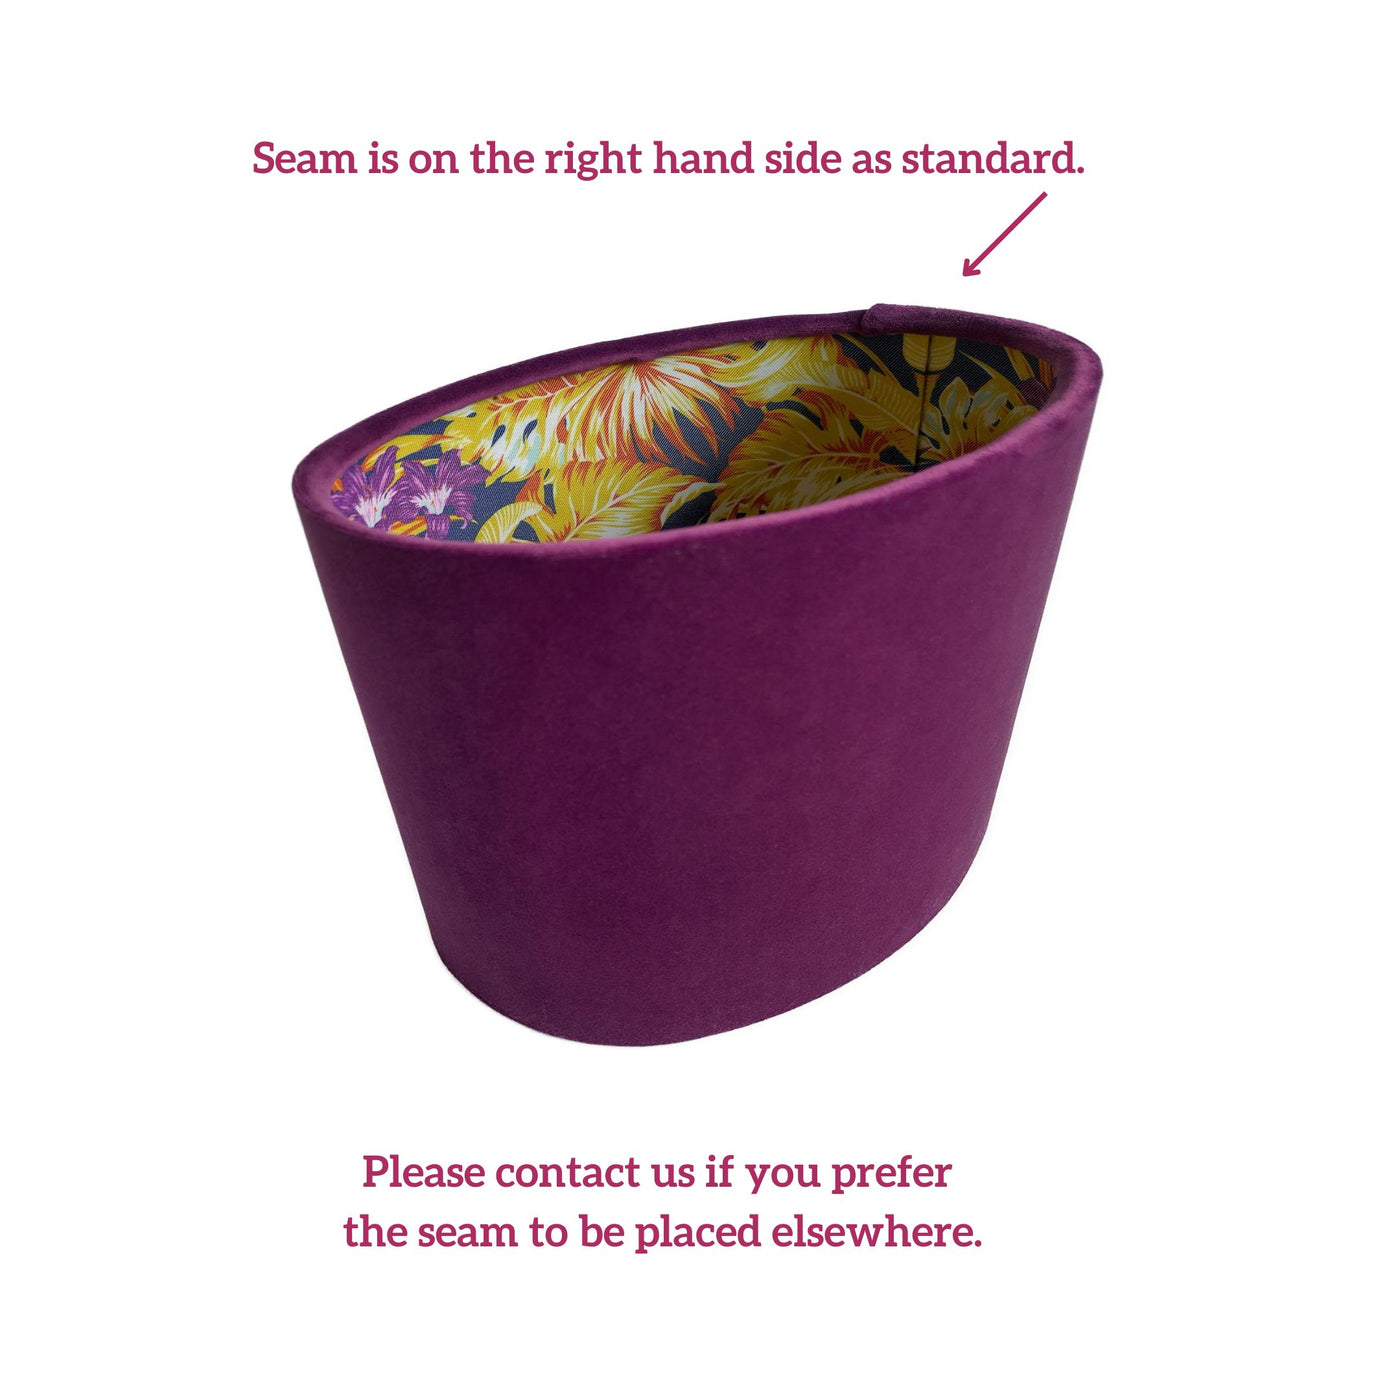 Oval lampshade in mulberry purple velvet with purple and gold tropical lining, side picture showing seam is on the right hand side. It's written please contact us if you prefer the seam to be placed elsewhere